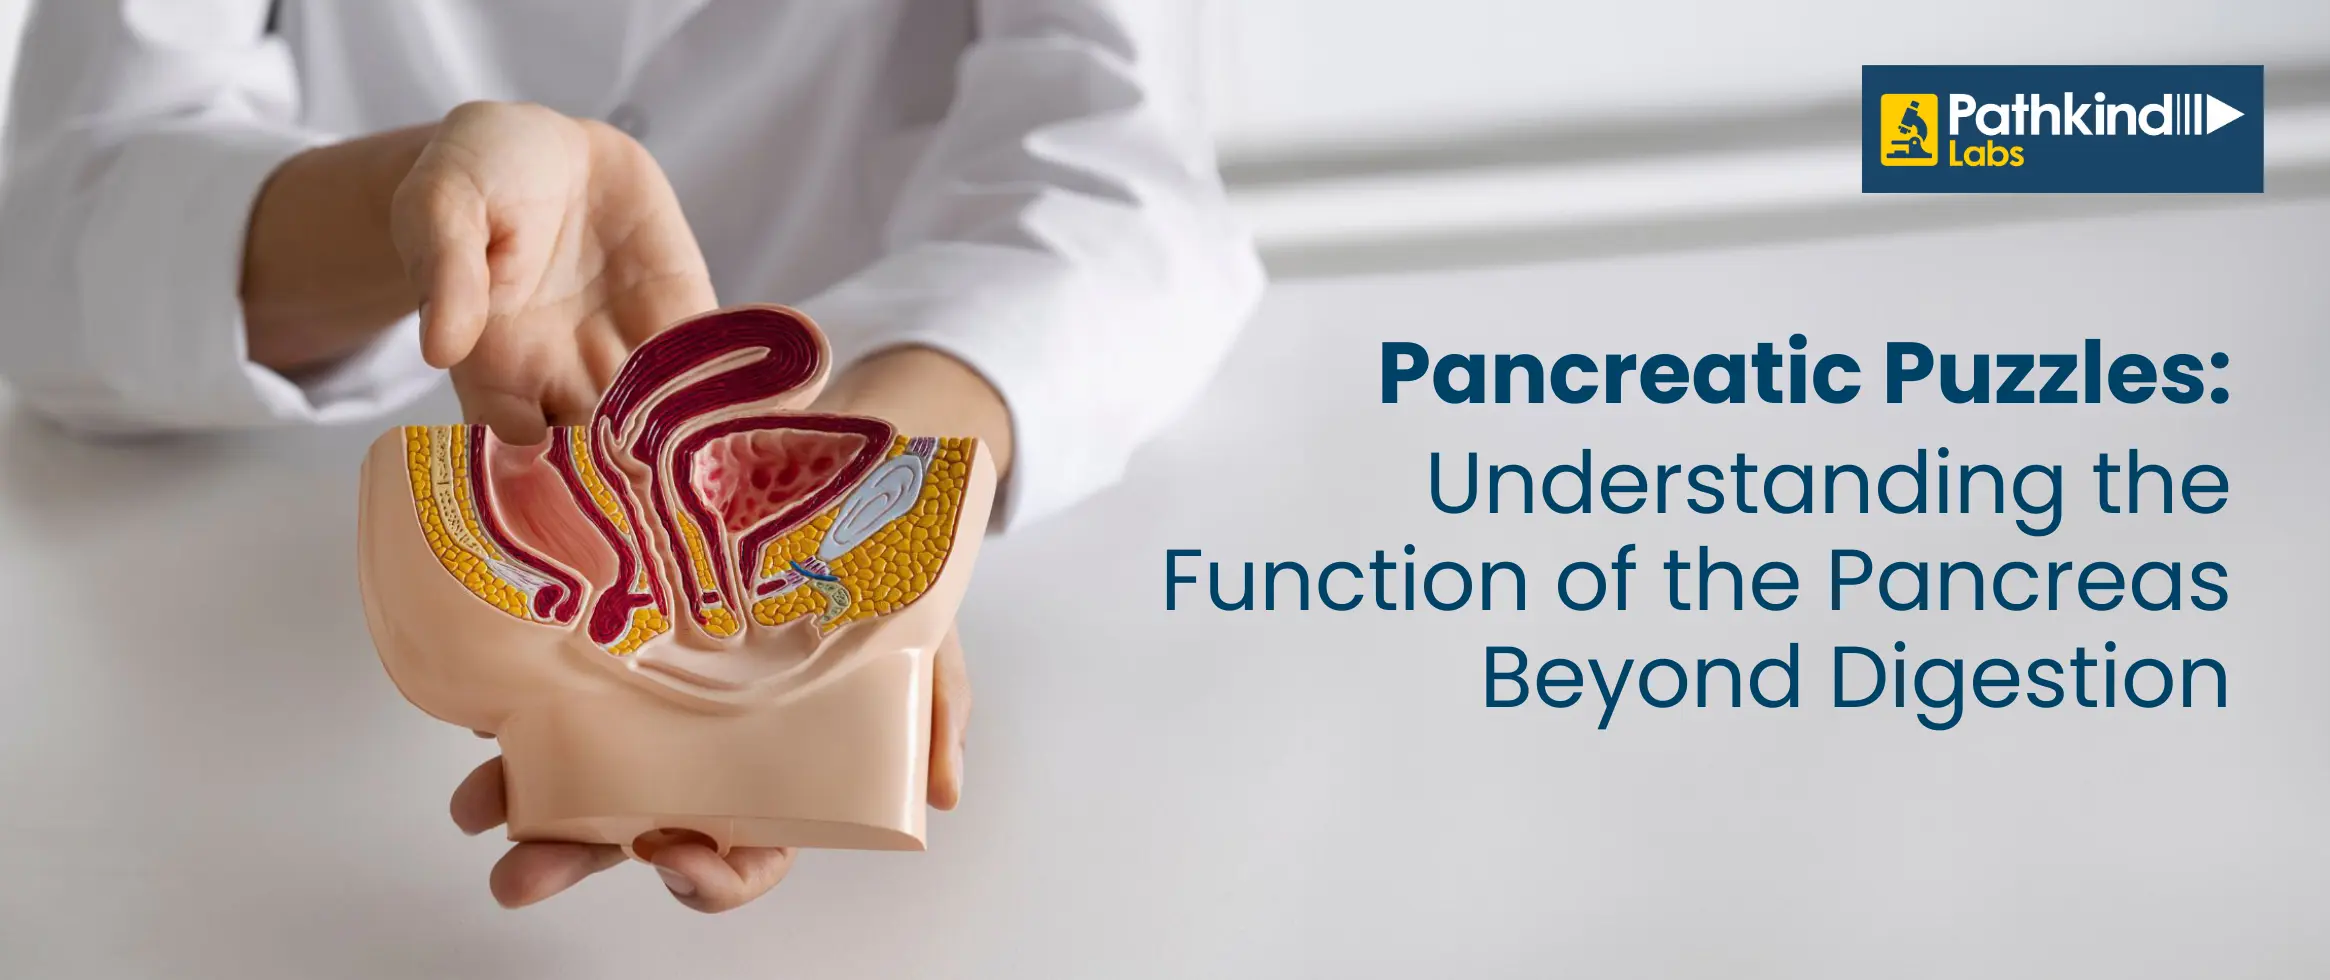  Pancreatic Puzzles: Understanding the Function of the Pancreas Beyond ...